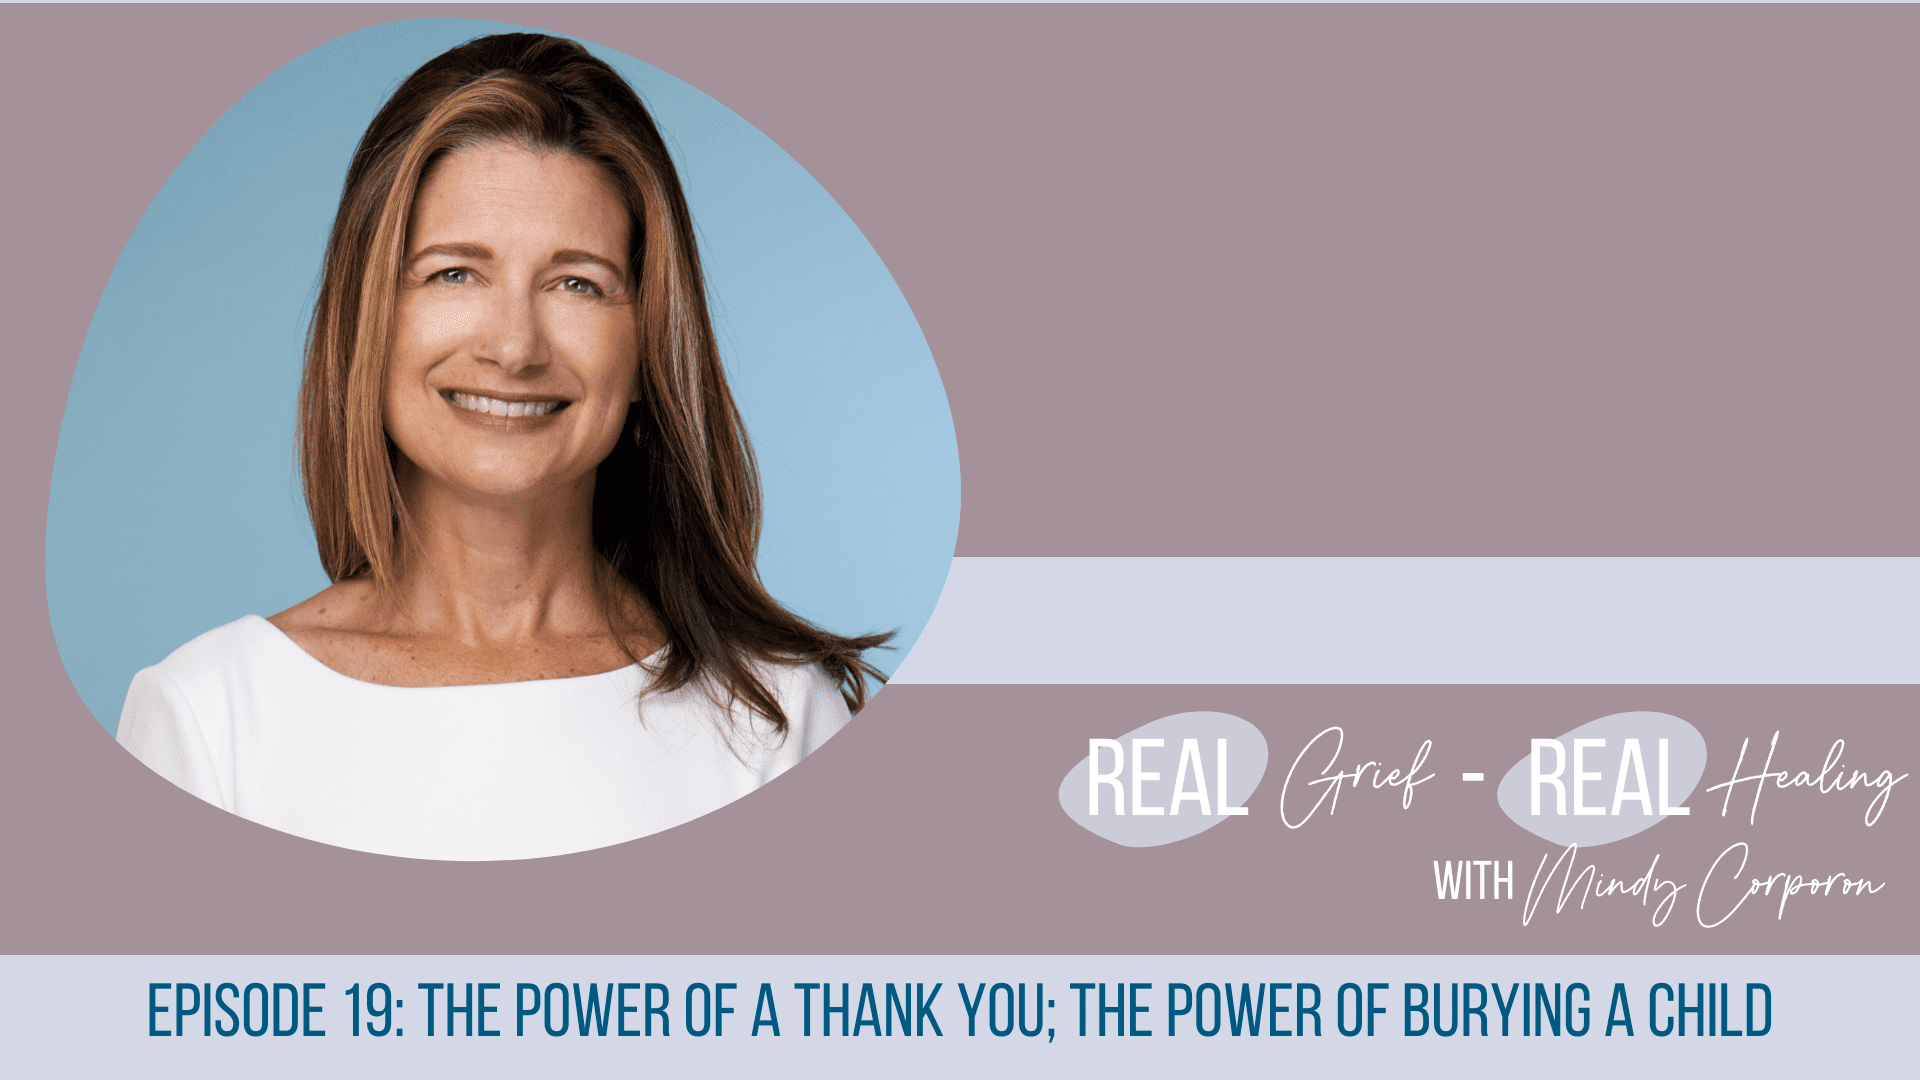 Real Grief Real Healing, podcast, thank you, power of a thank you